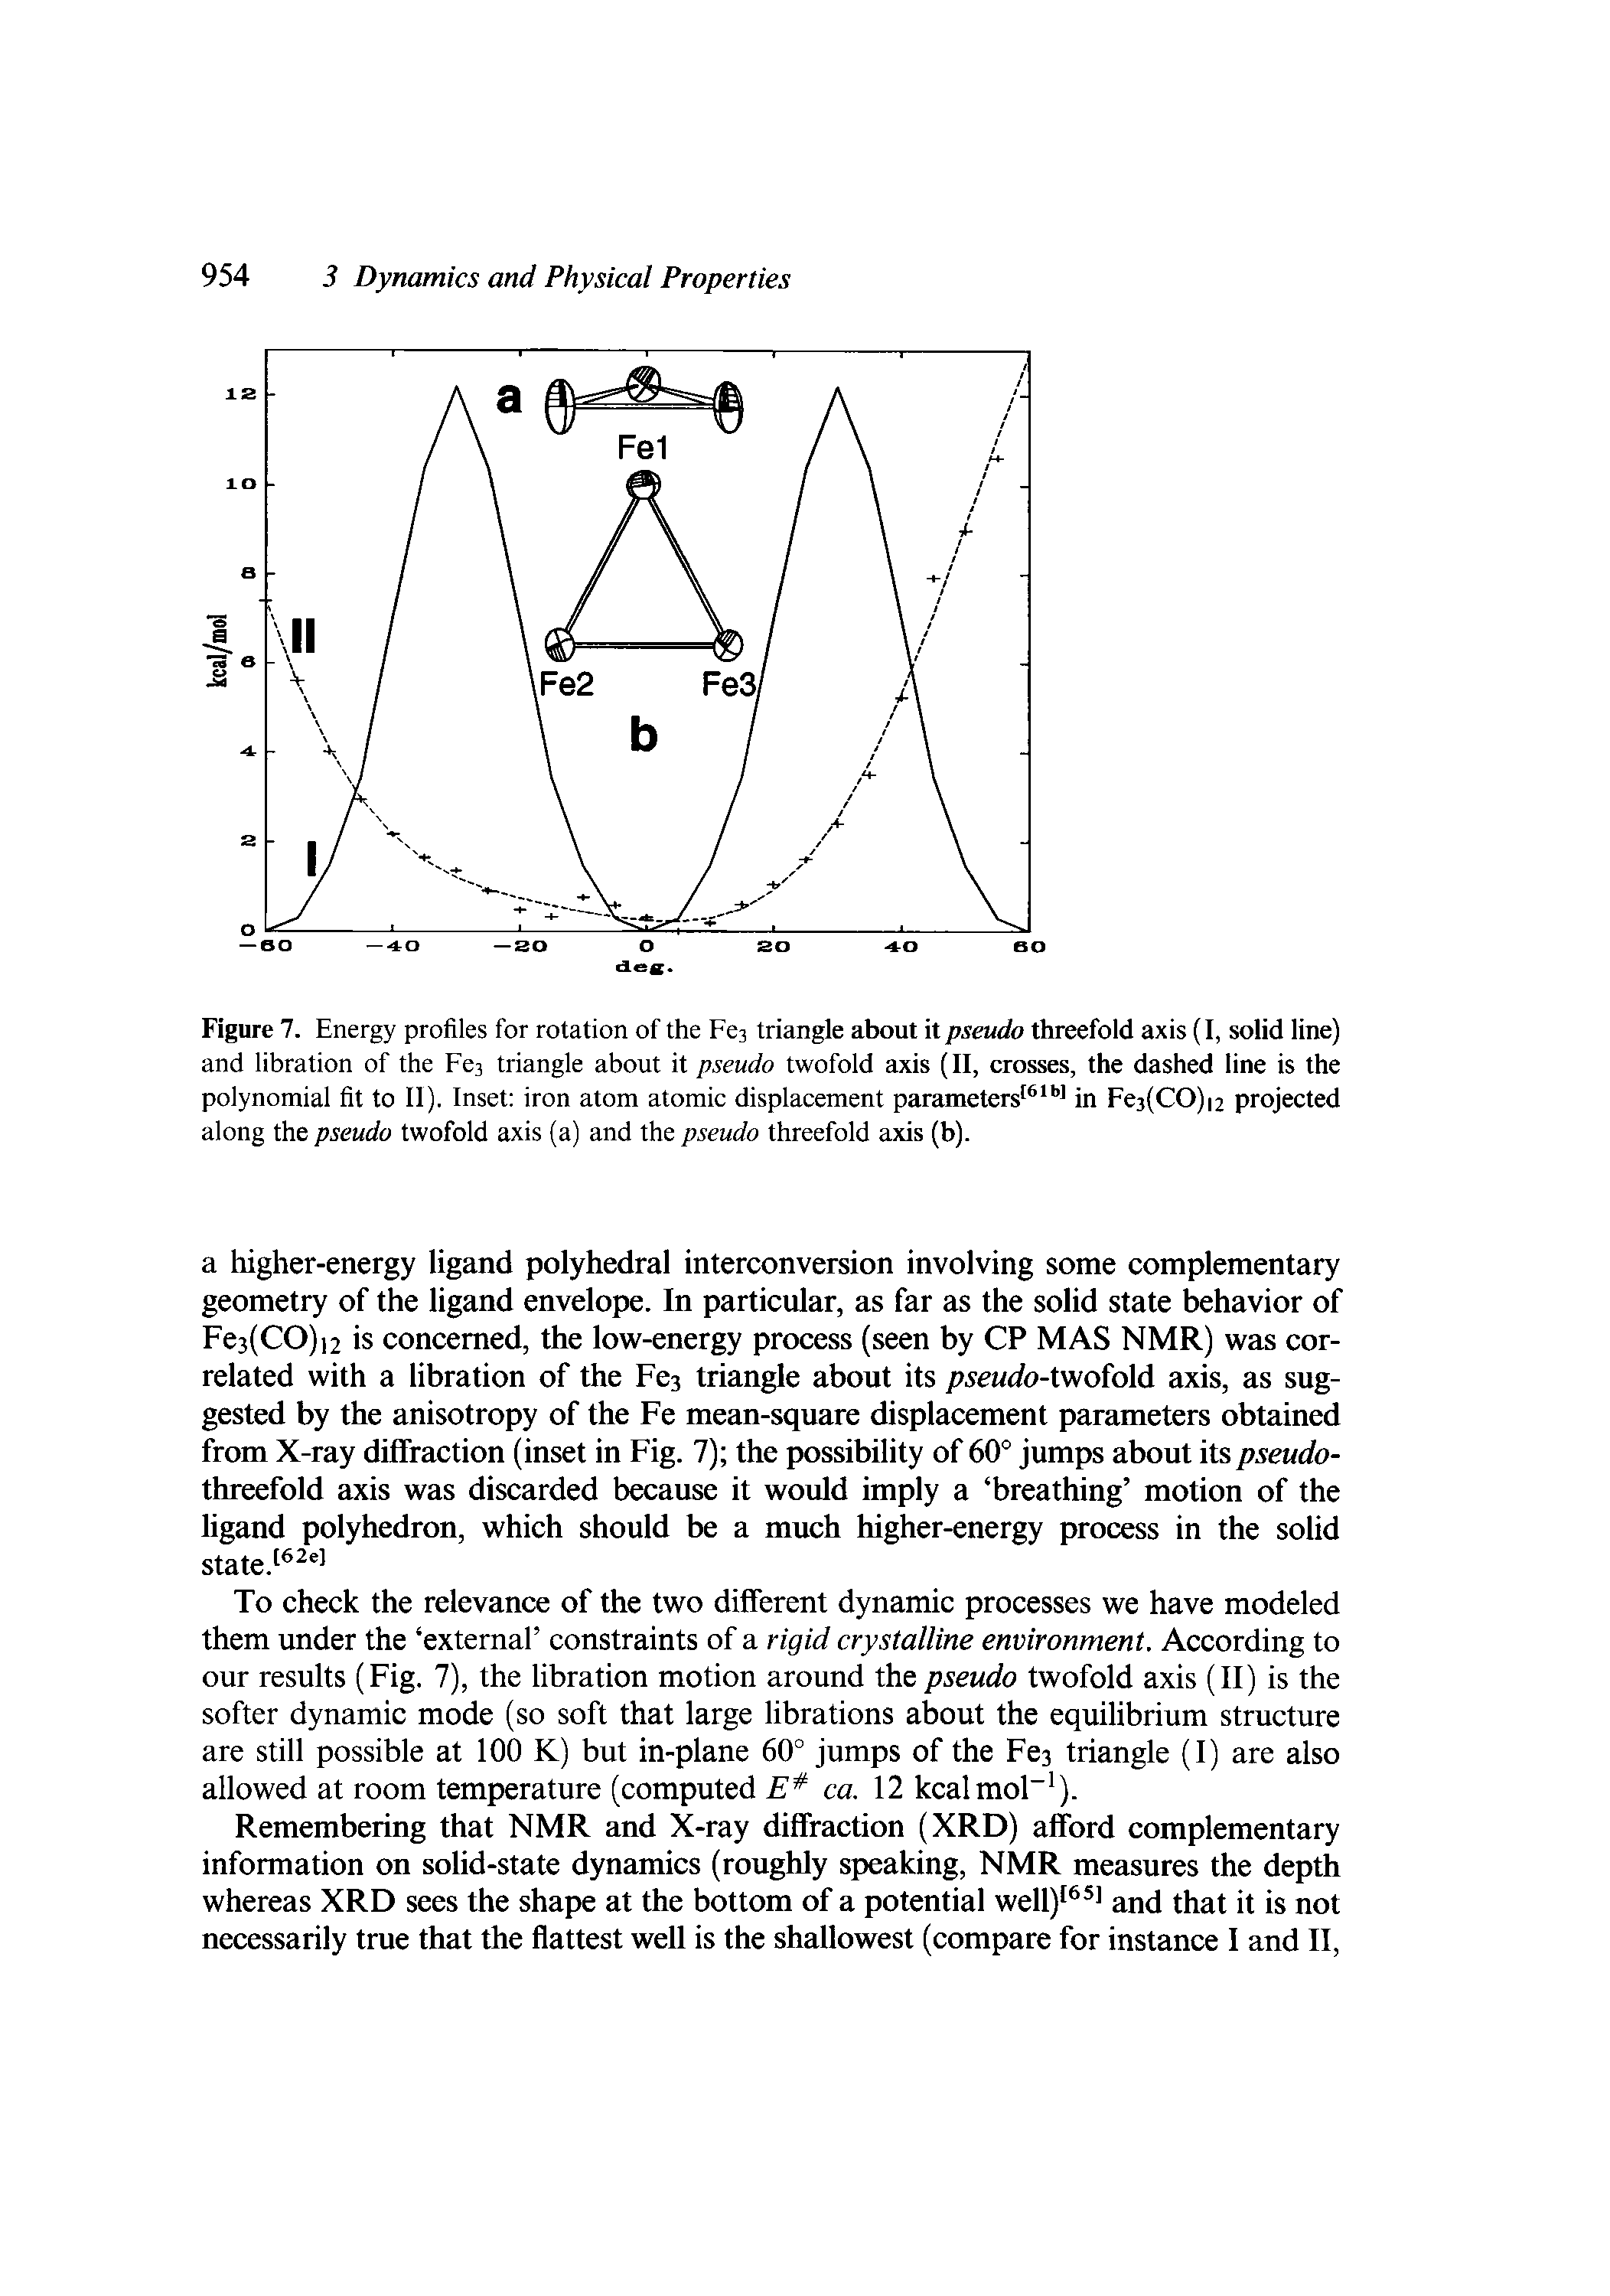 Figure 7. Energy profiles for rotation of the Fes triangle about it pseudo threefold axis (I, solid line) and libration of the Fes triangle about it pseudo twofold axis (II, crosses, the dashed line is the polynomial fit to II). Inset iron atom atomic displacement parameters " in Fes(CO)i2 projected along the pseudo twofold axis (a) and the pseudo threefold axis (b).